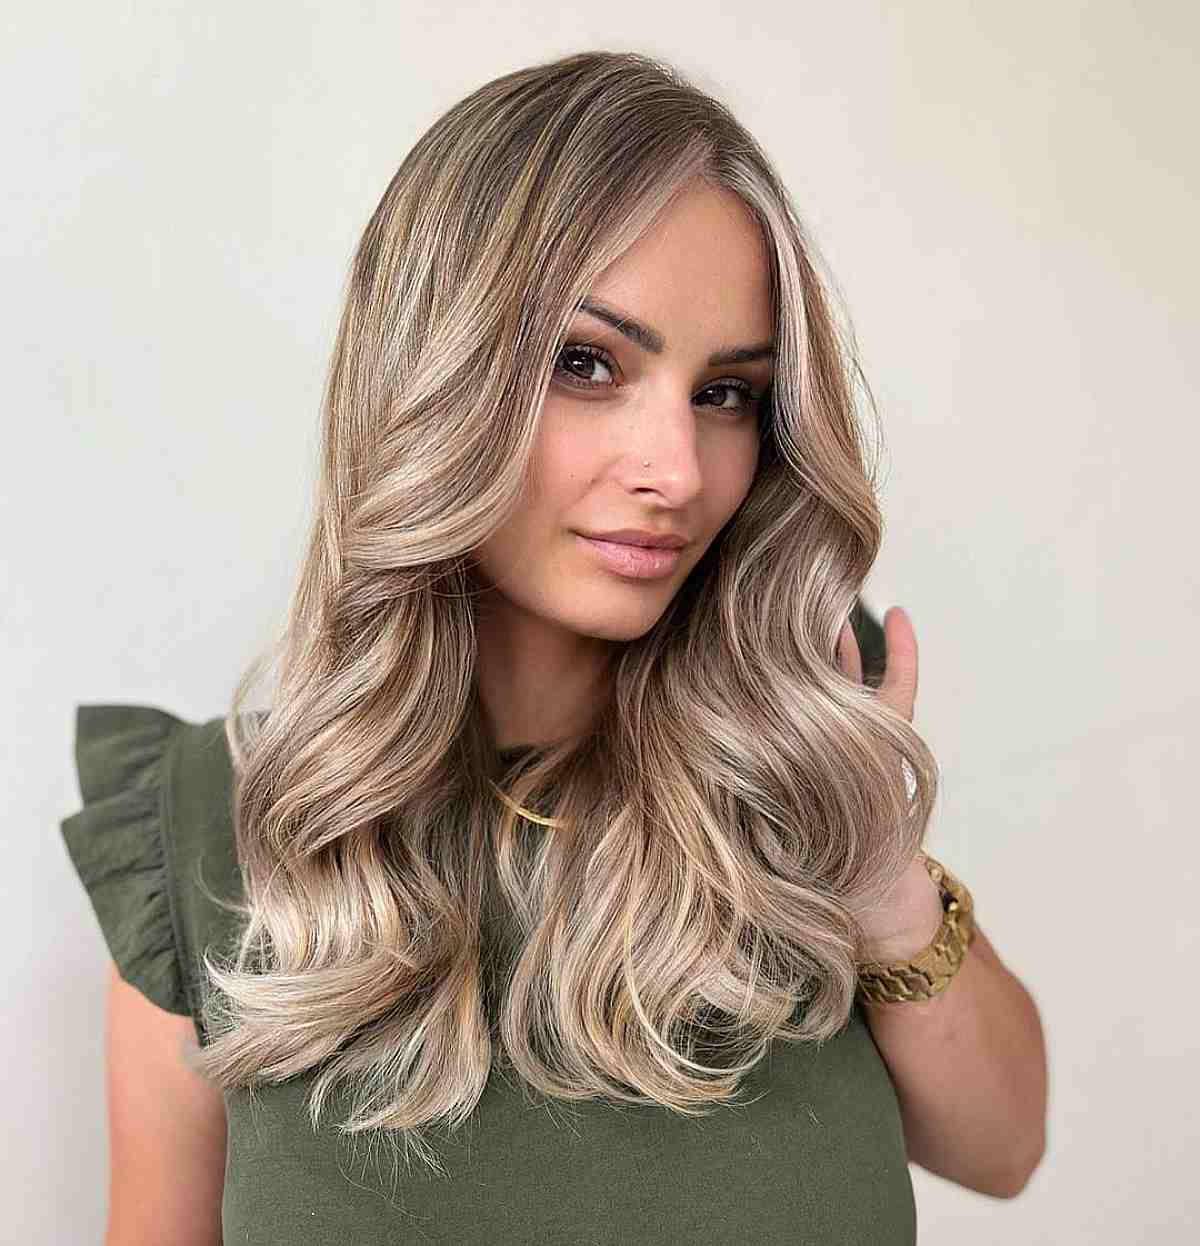 Stunning Blonde Balayage Straight Hair with Curled Ends